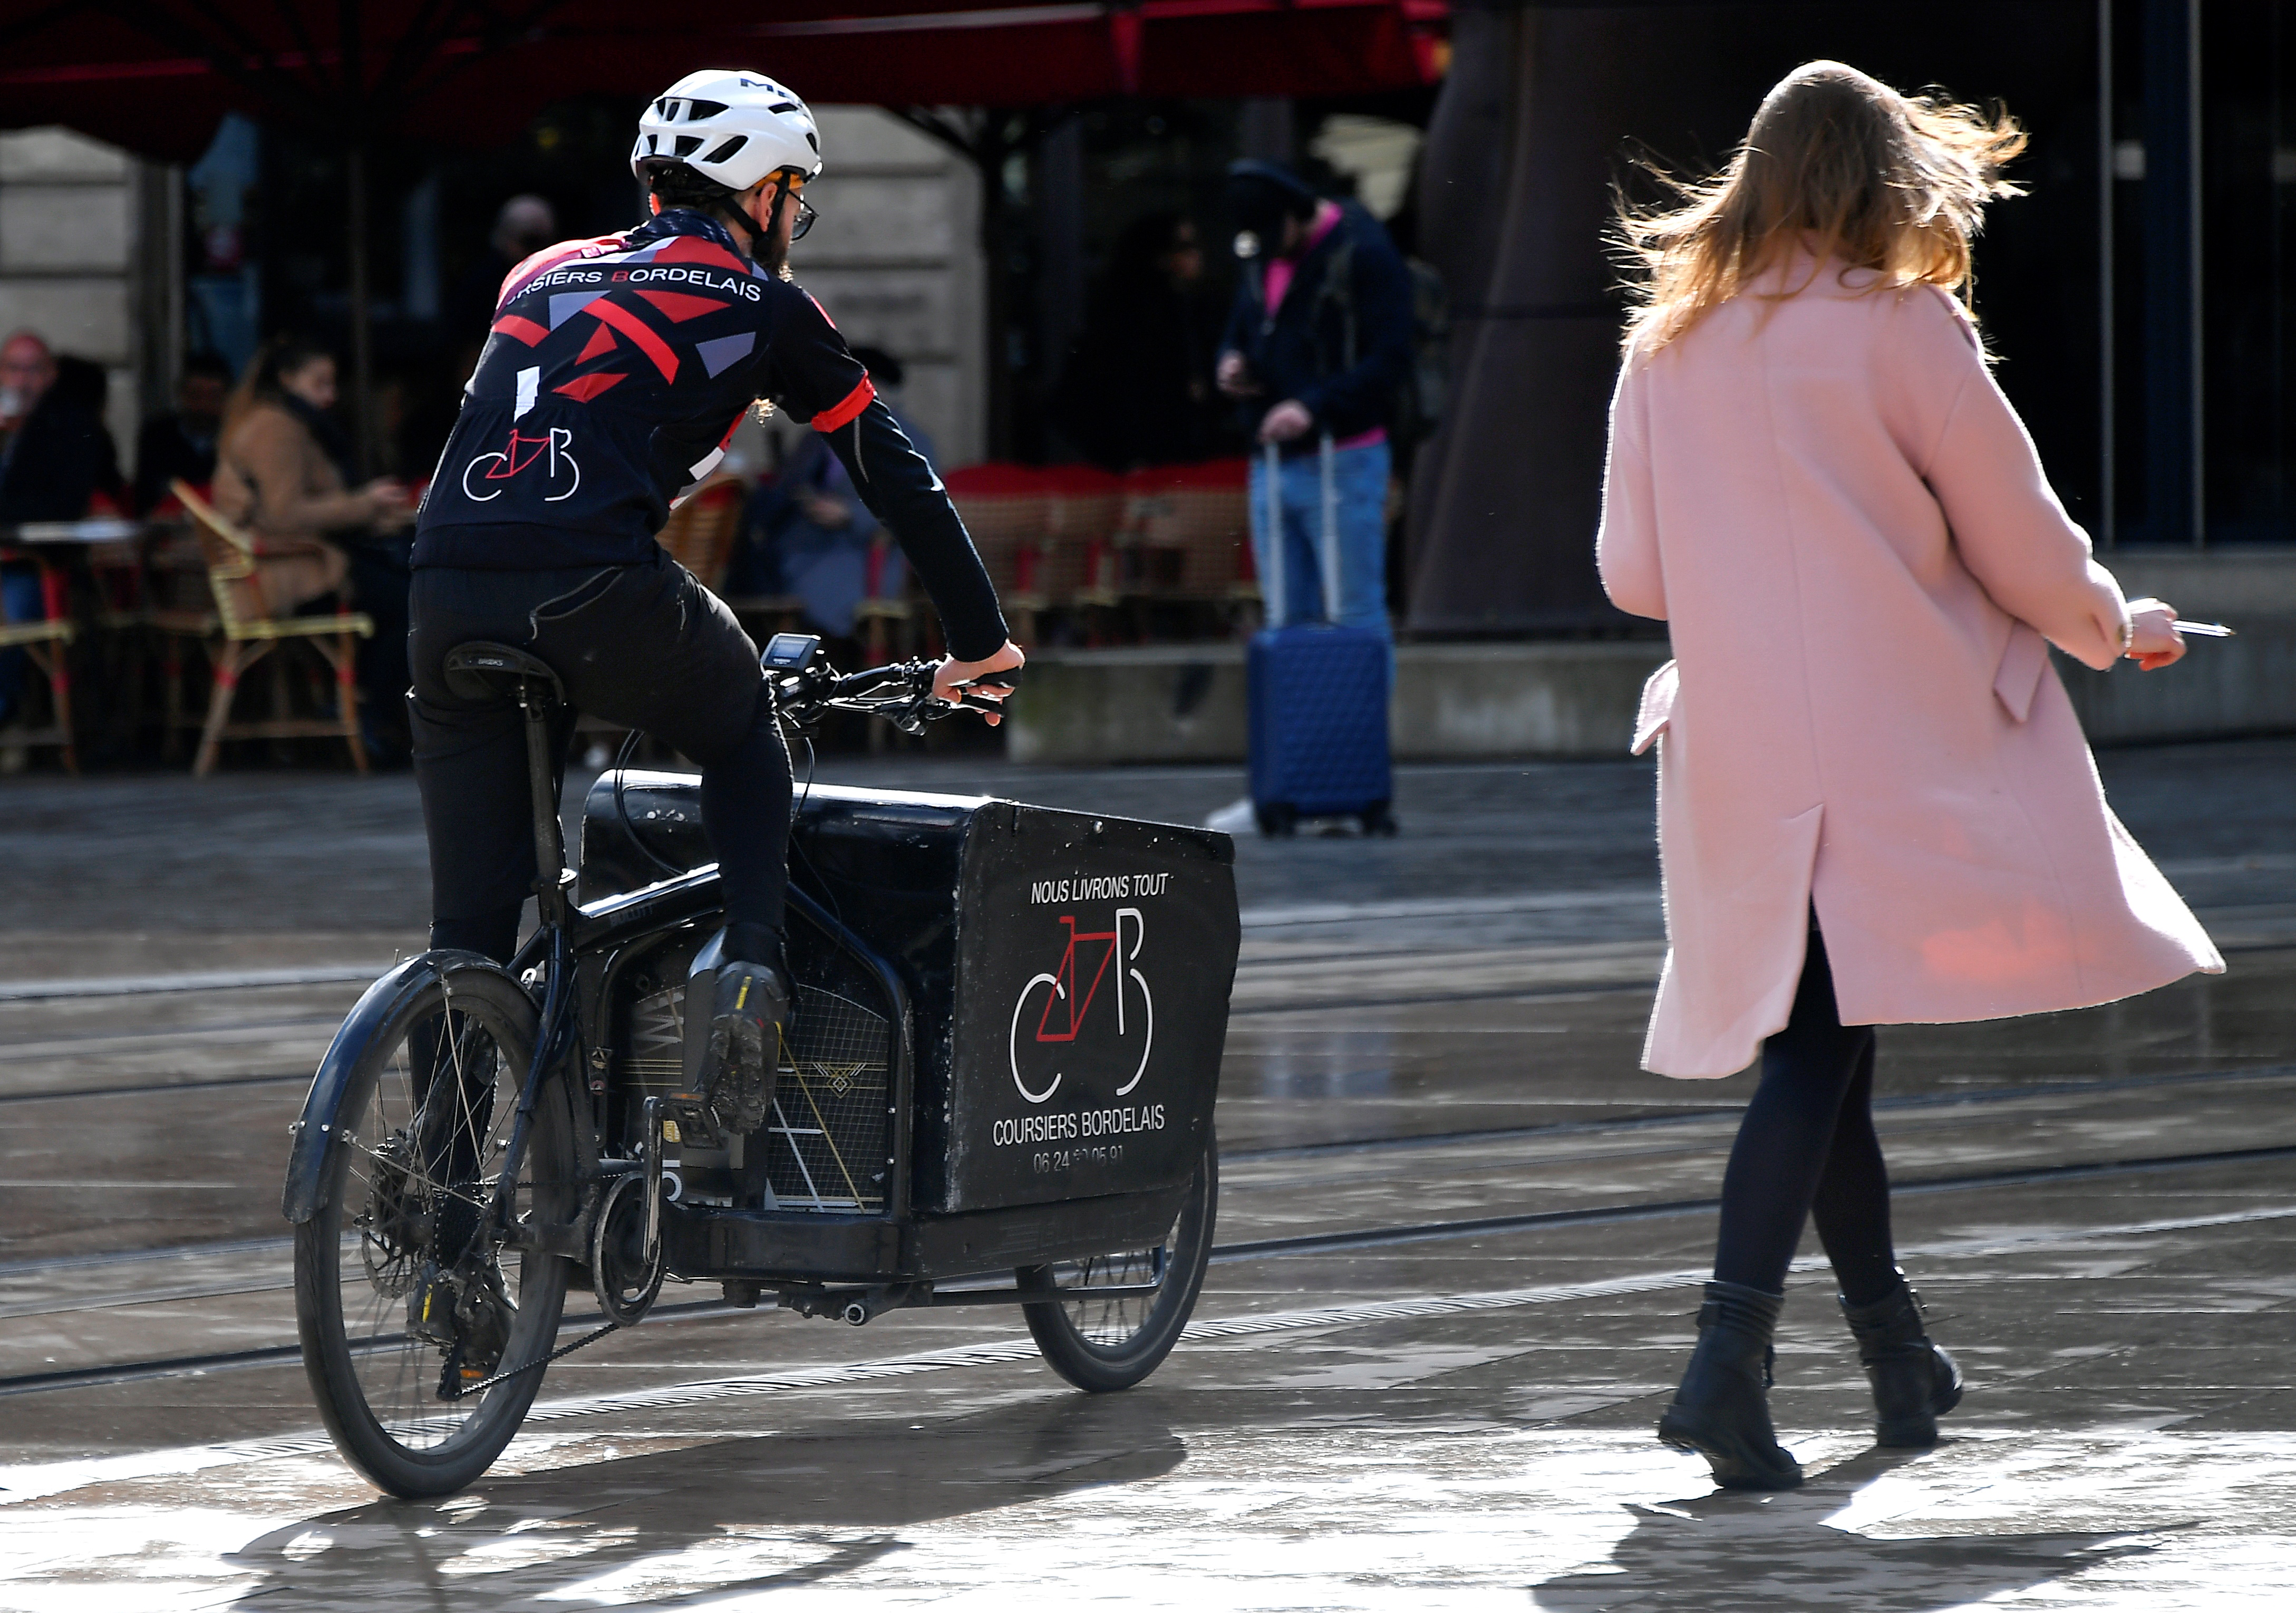 Brussels bets on cargo bikes